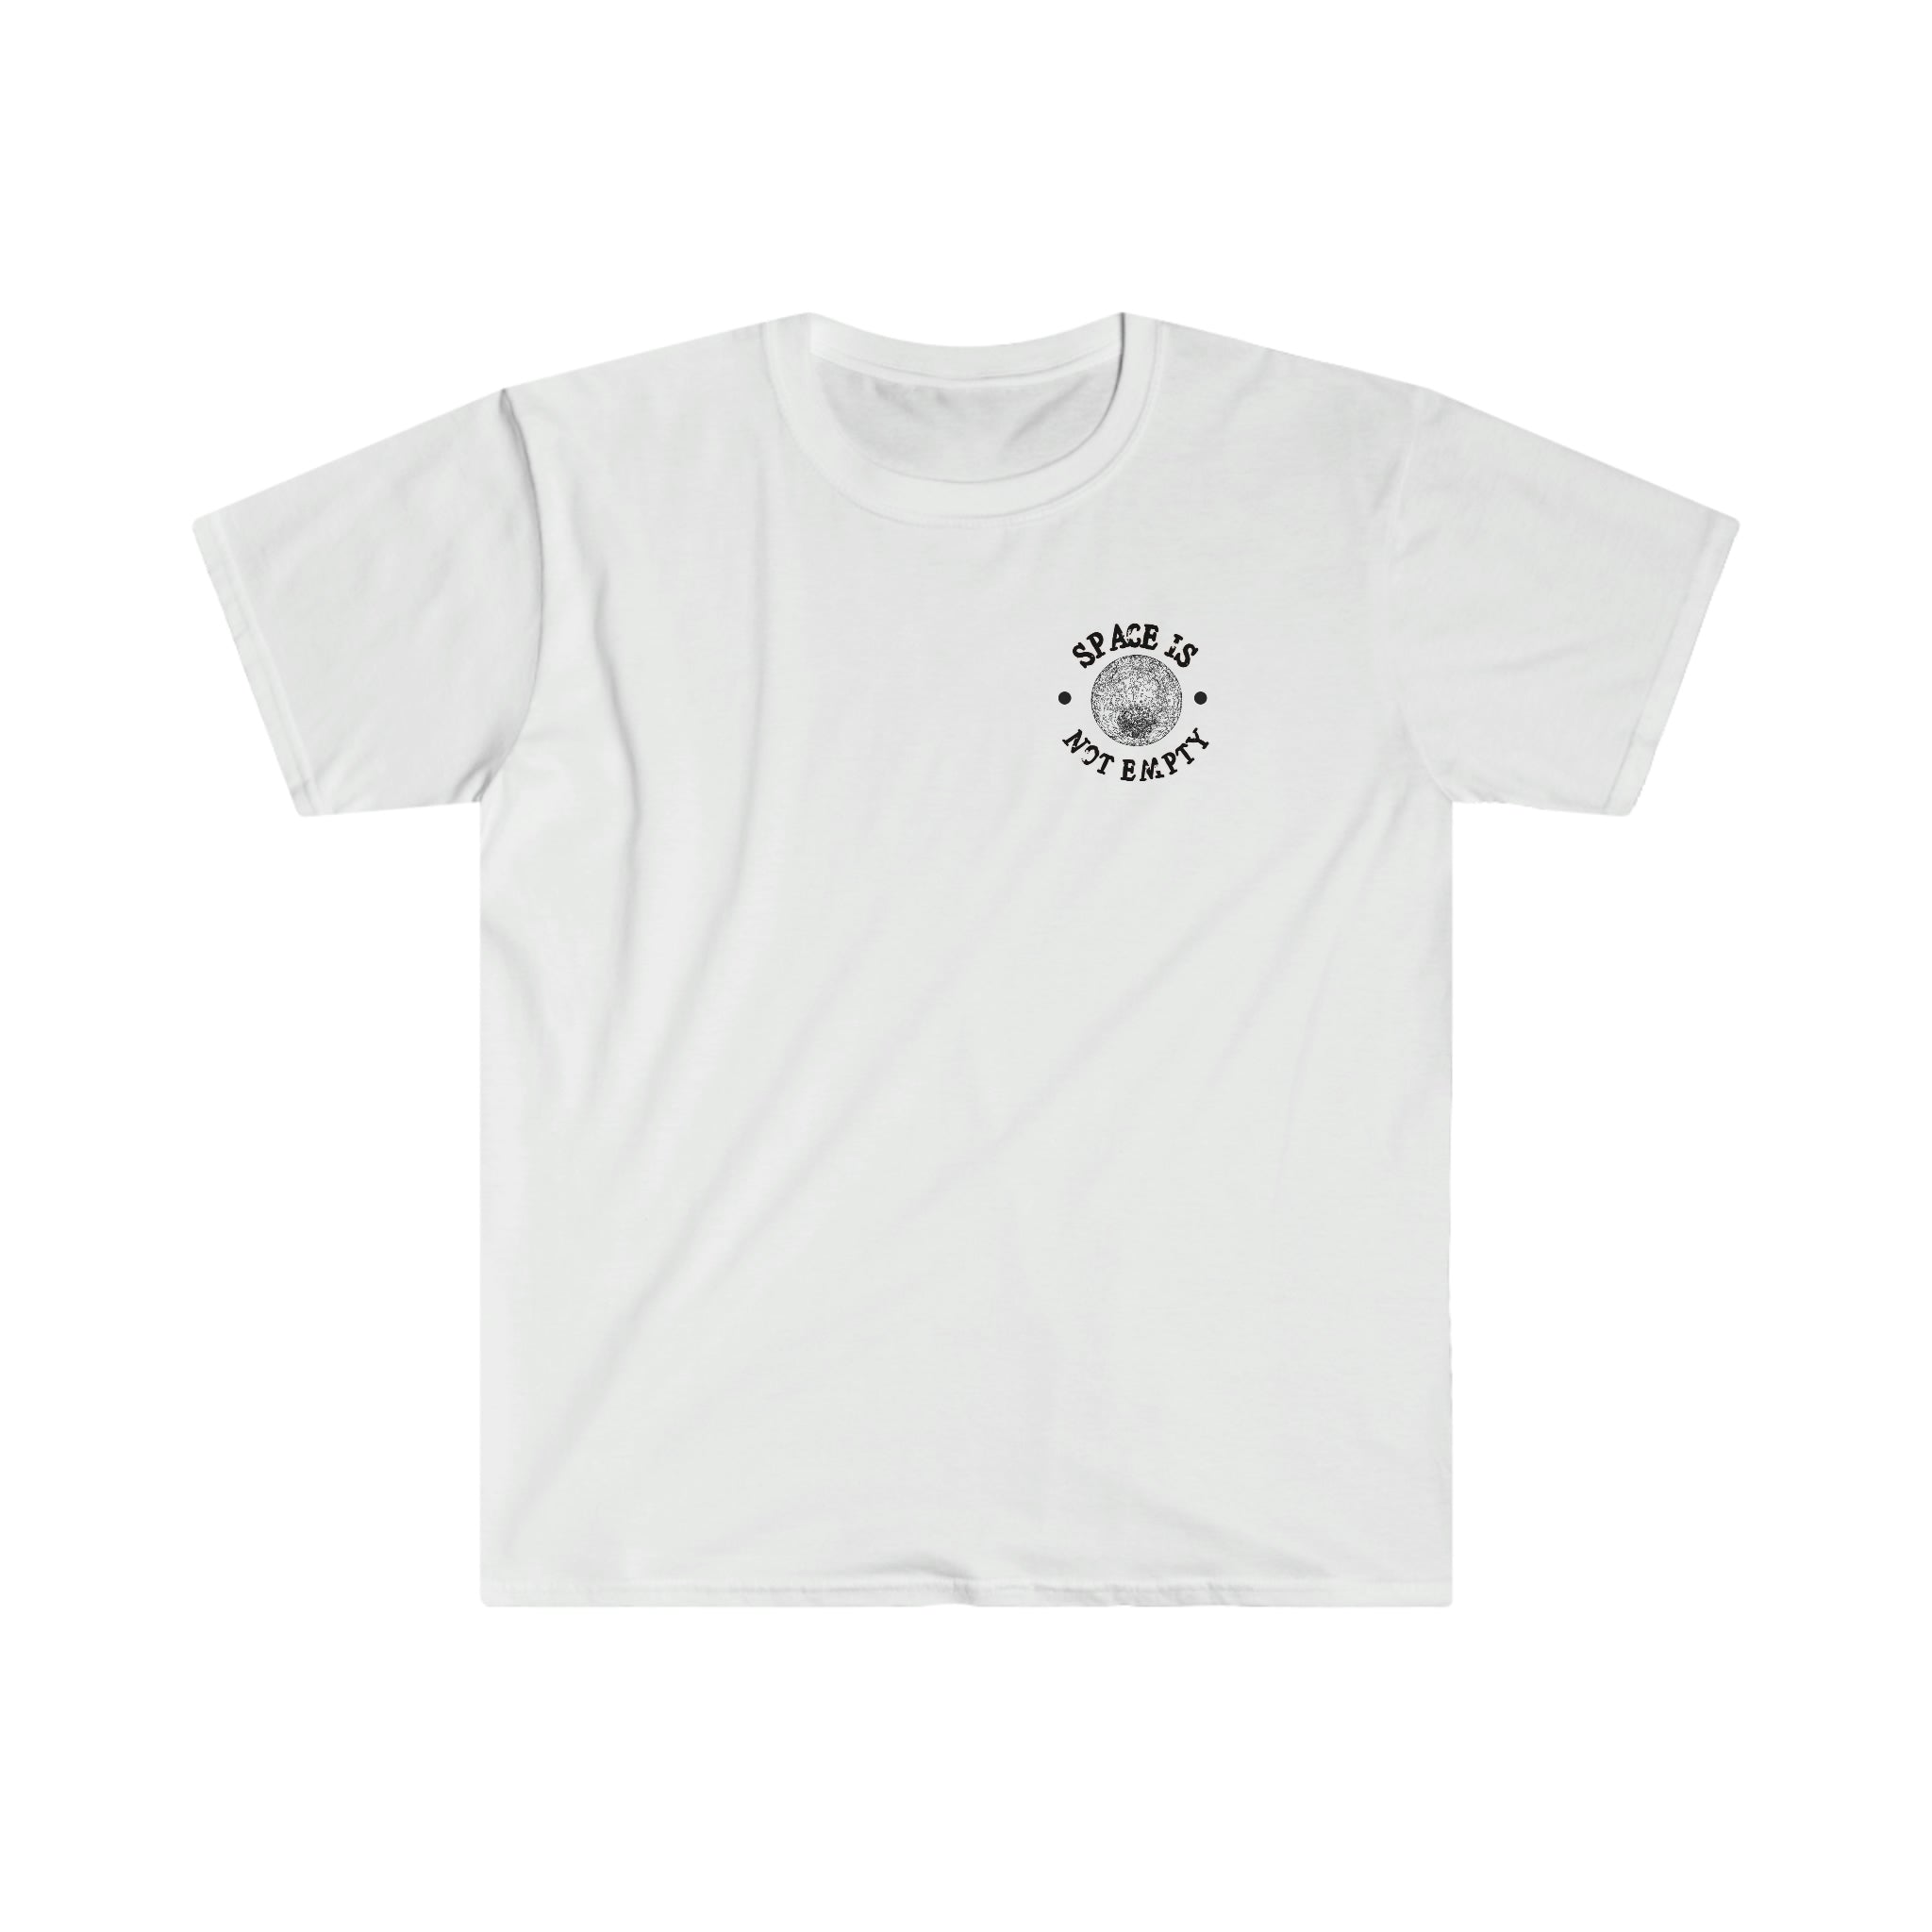 A white Save Me From Space T-Shirt with a black "Save me from Space" logo on it.